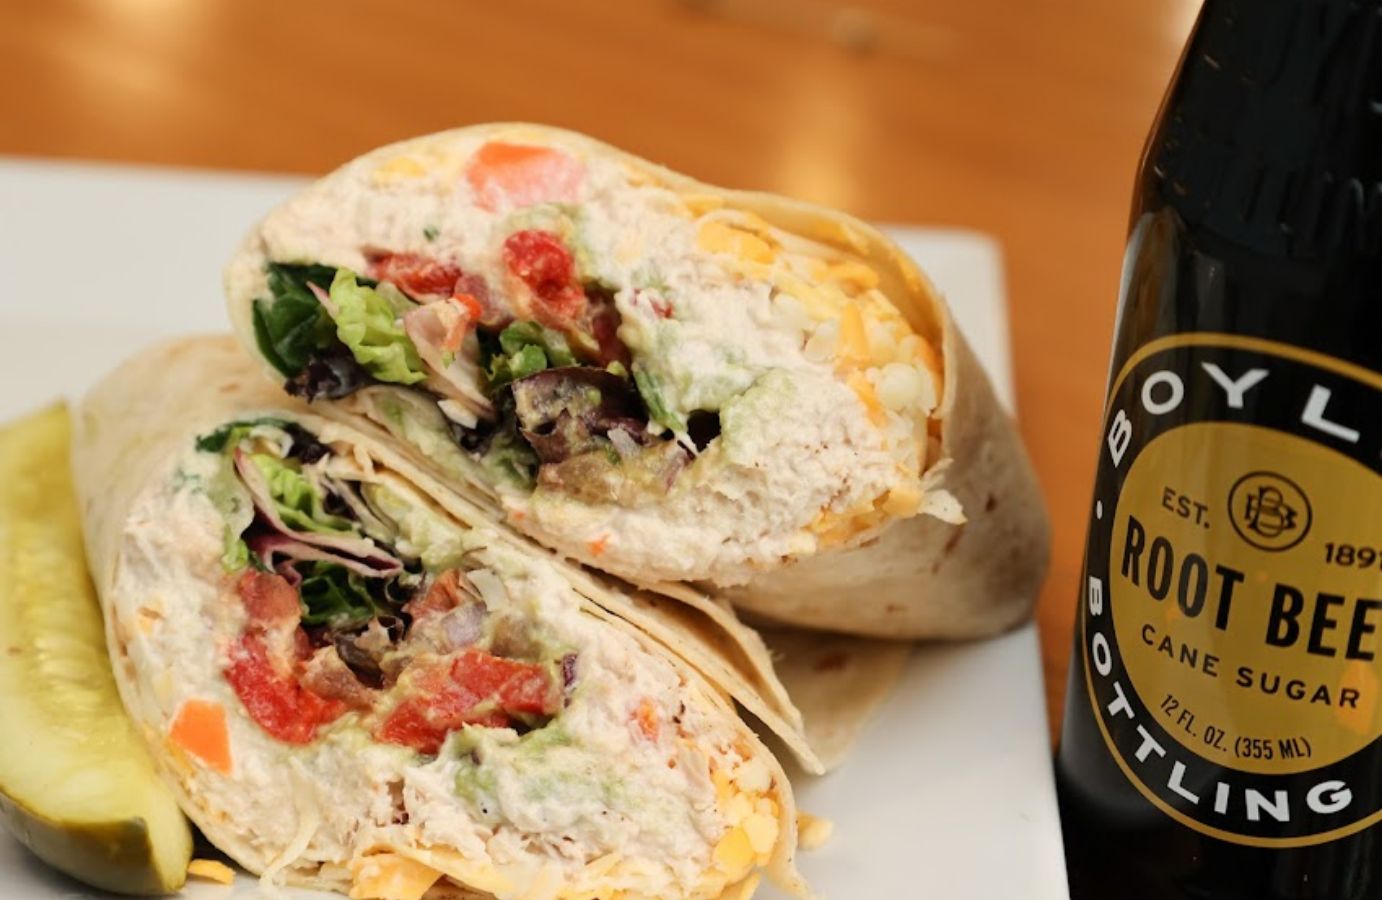 Closeup of a wrap on a plate and a bottle of root beer on the side